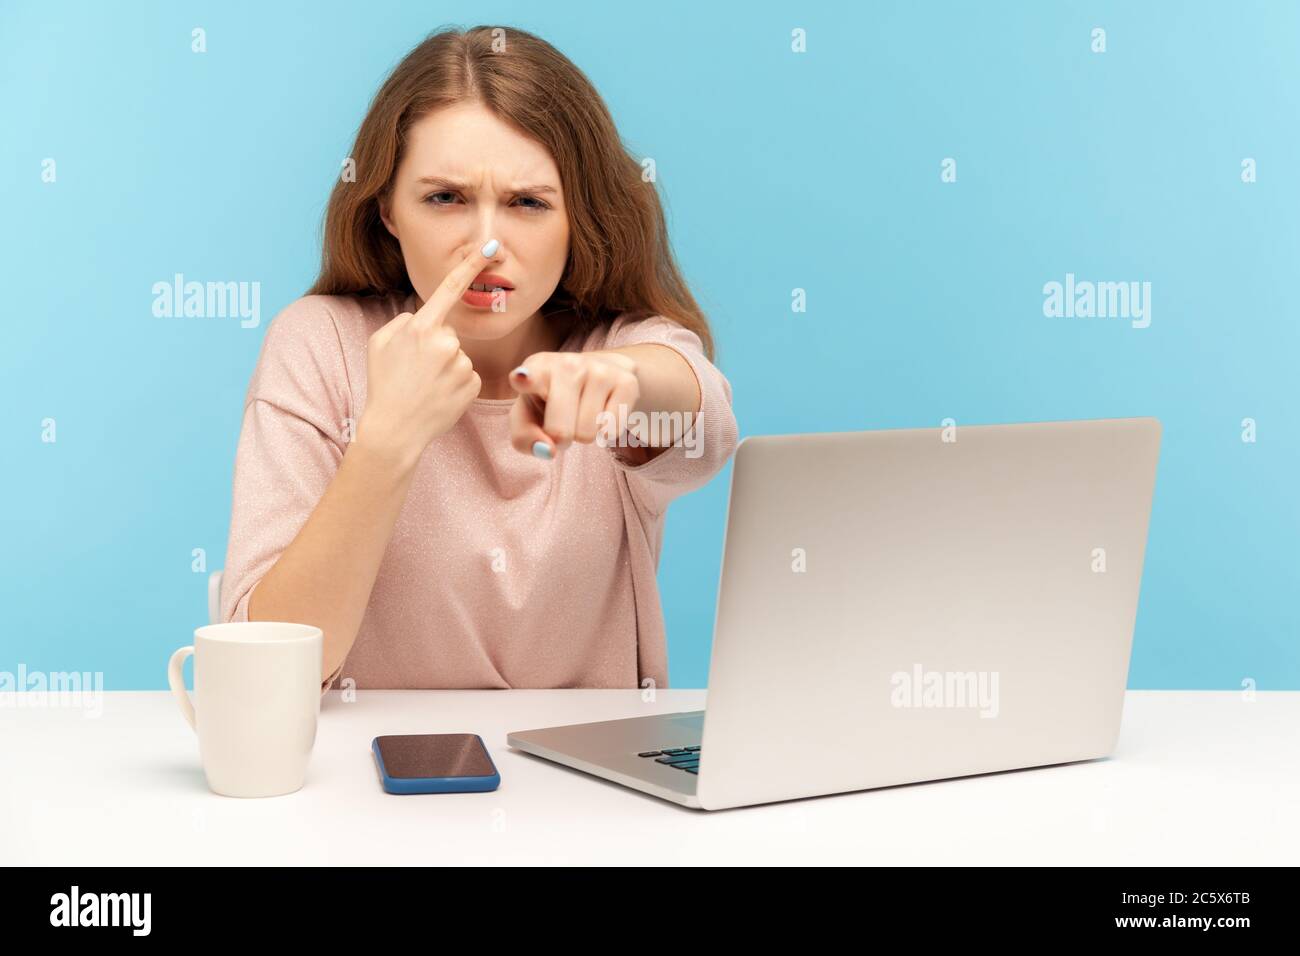 You are liar! Angry young woman employee sitting at workplace, touching nose and pointing to camera, blaming liar in deception, suspecting falsehood. Stock Photo